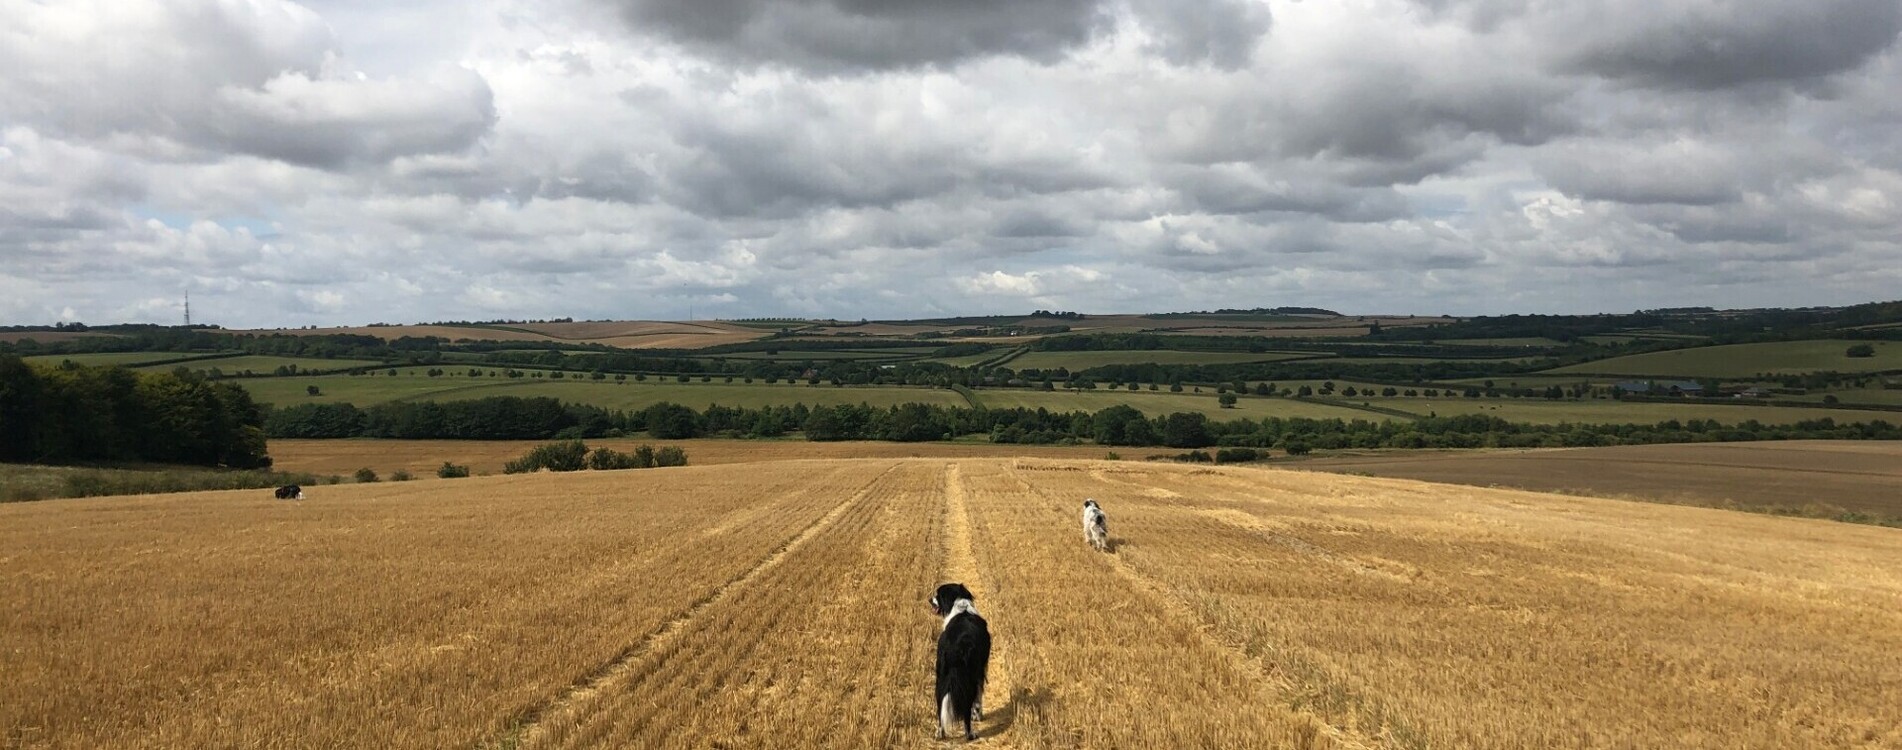 Dog in a field by Alice Robertson (cropped)